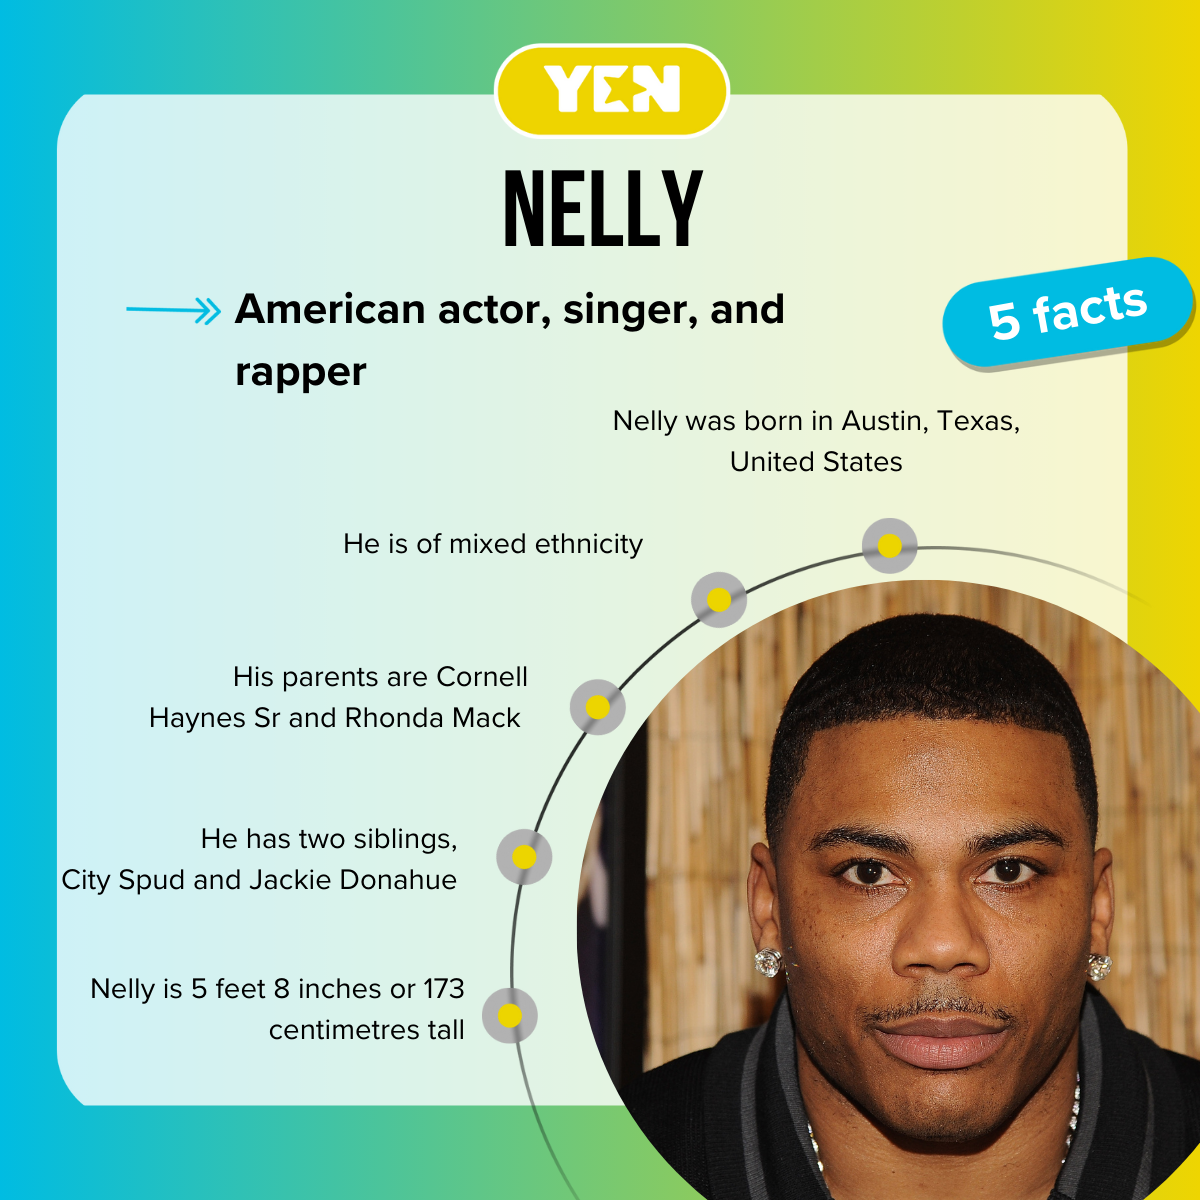 Facts about Nelly